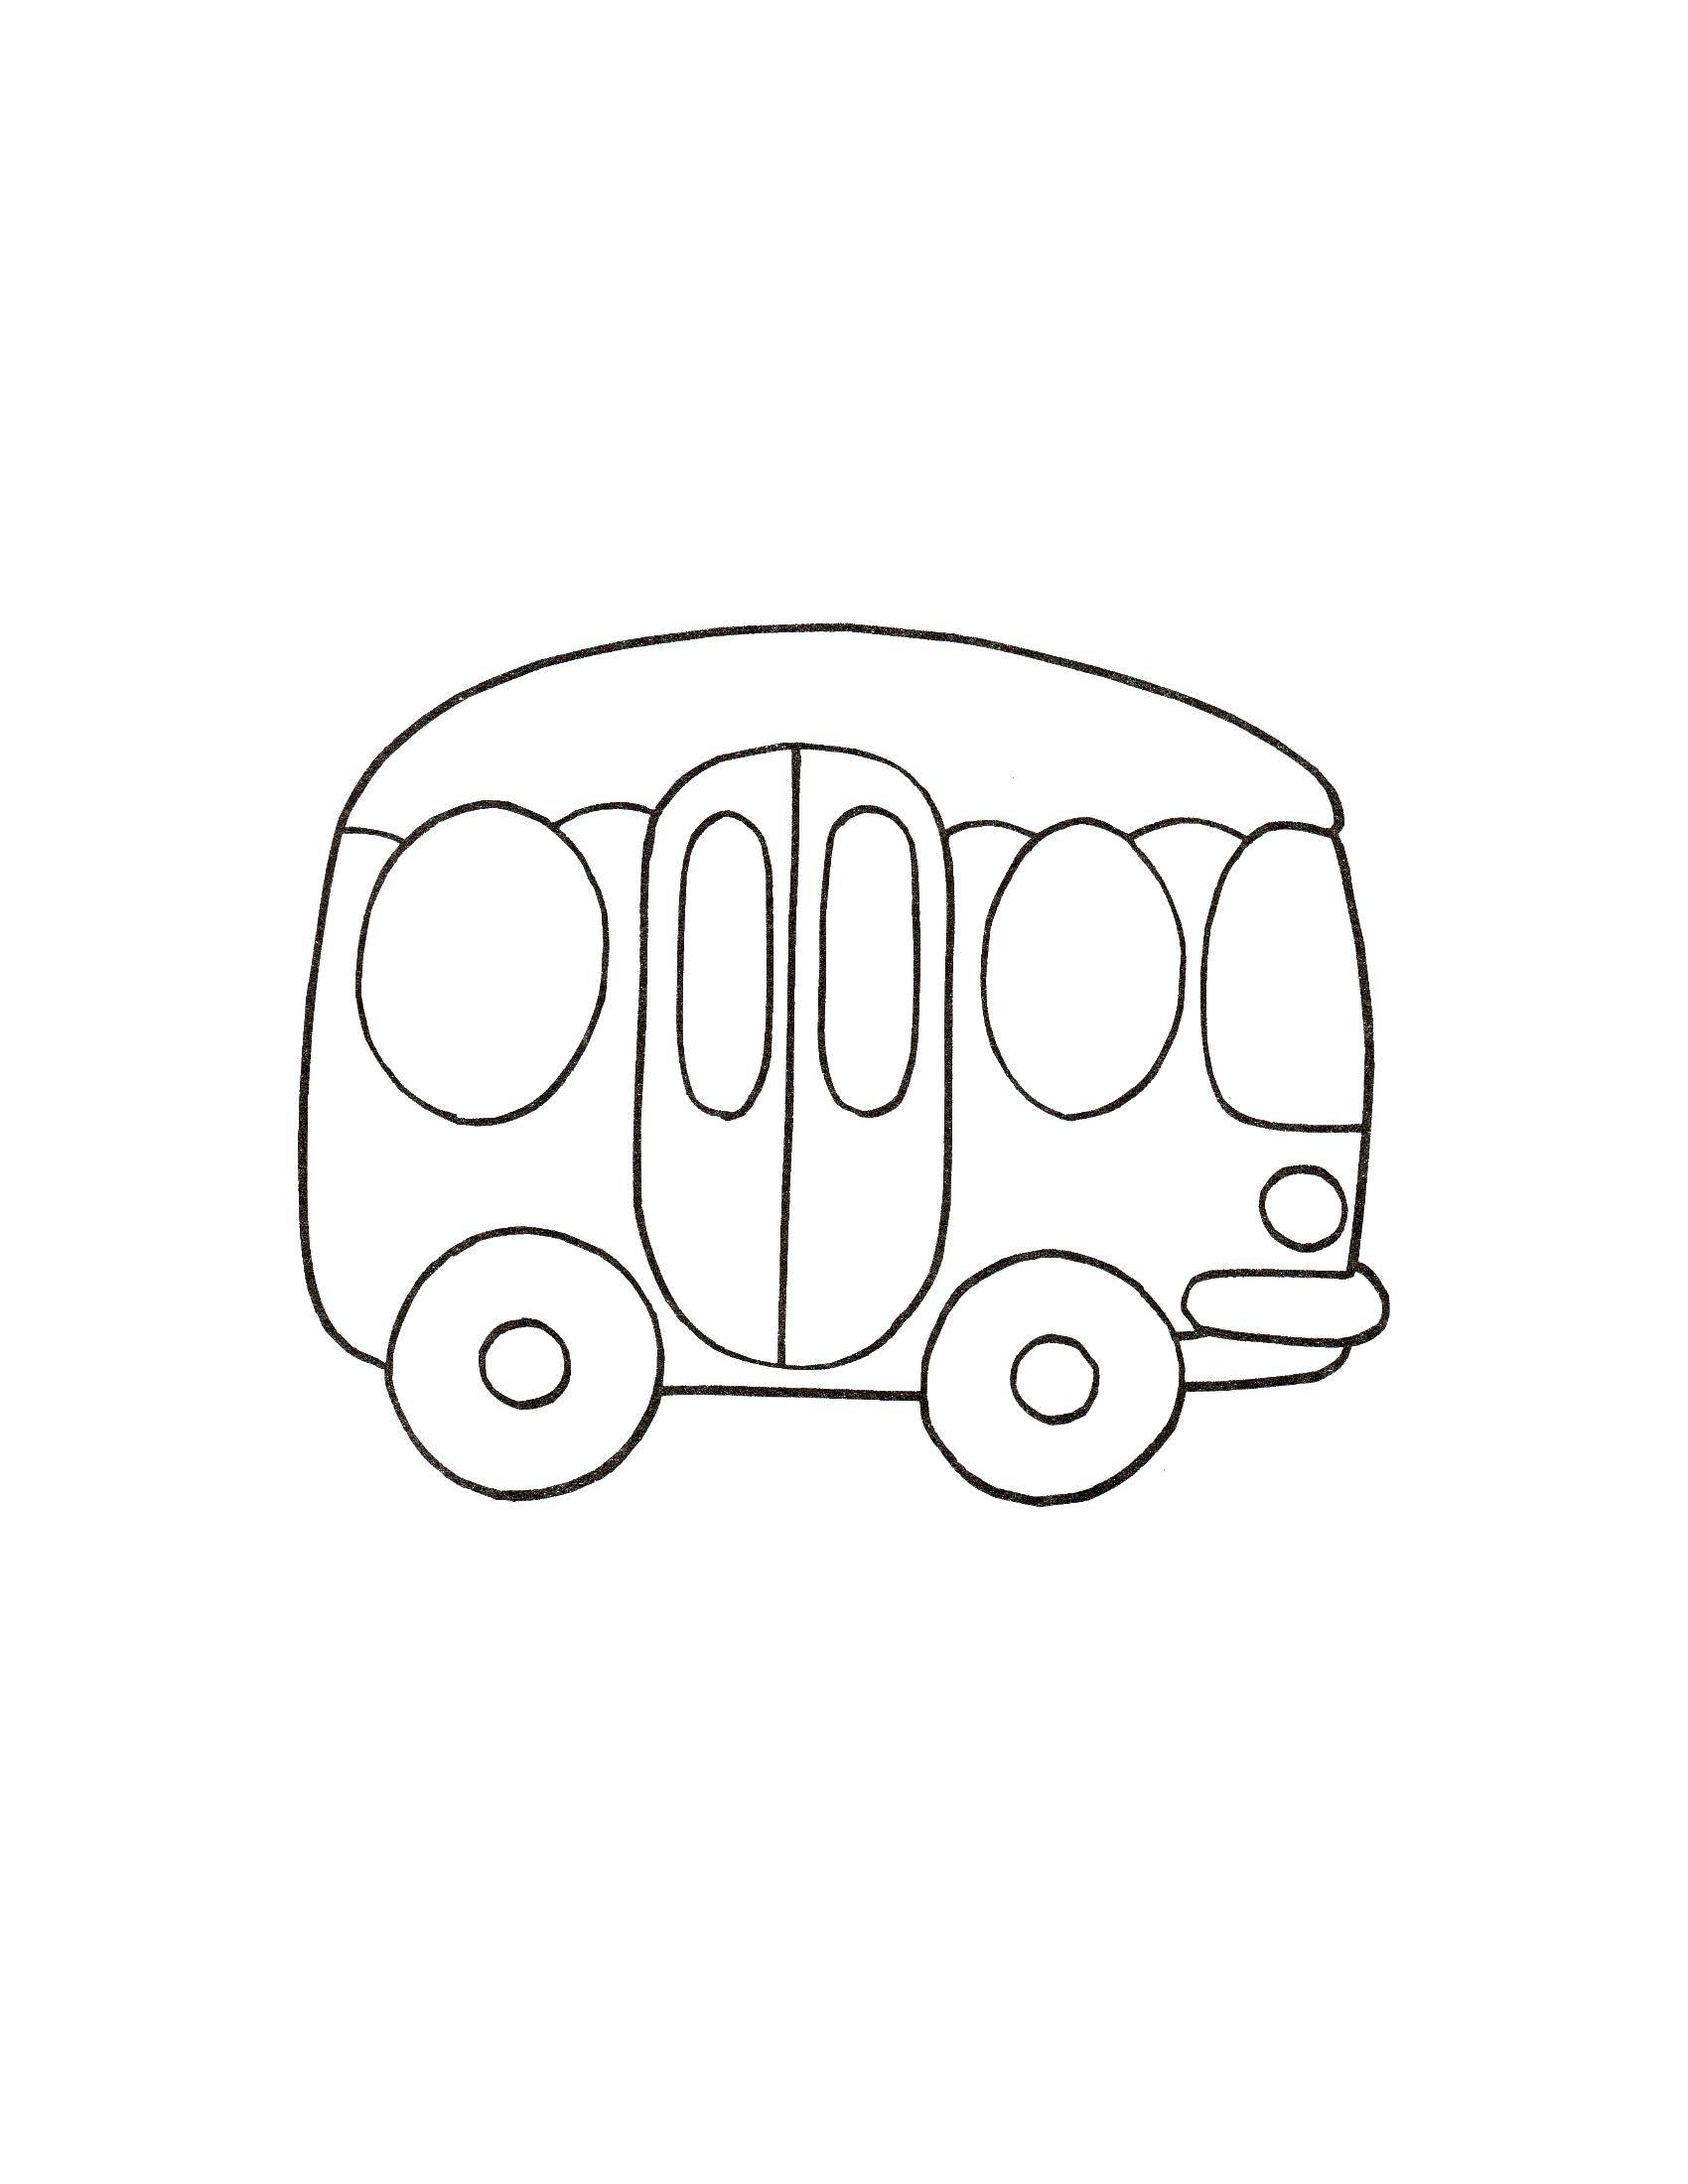 Coloring Small bus. Category little ones. Tags:  Car, bus.